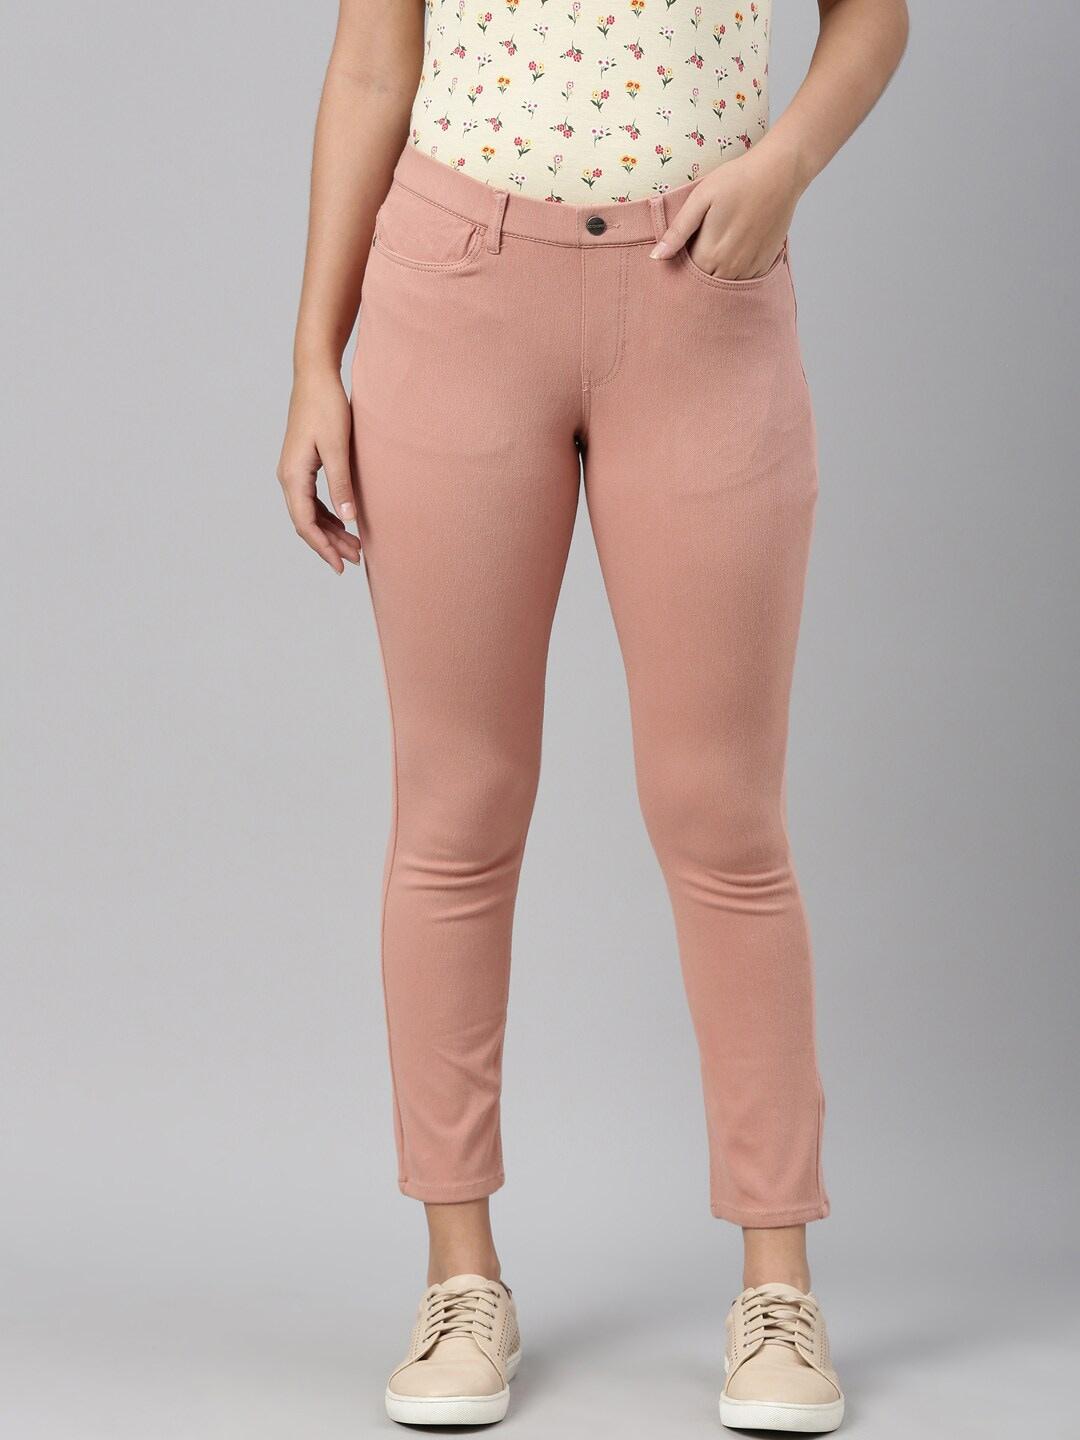 go-colors-women-pink-solid-slim-fit-cropped-jeggings